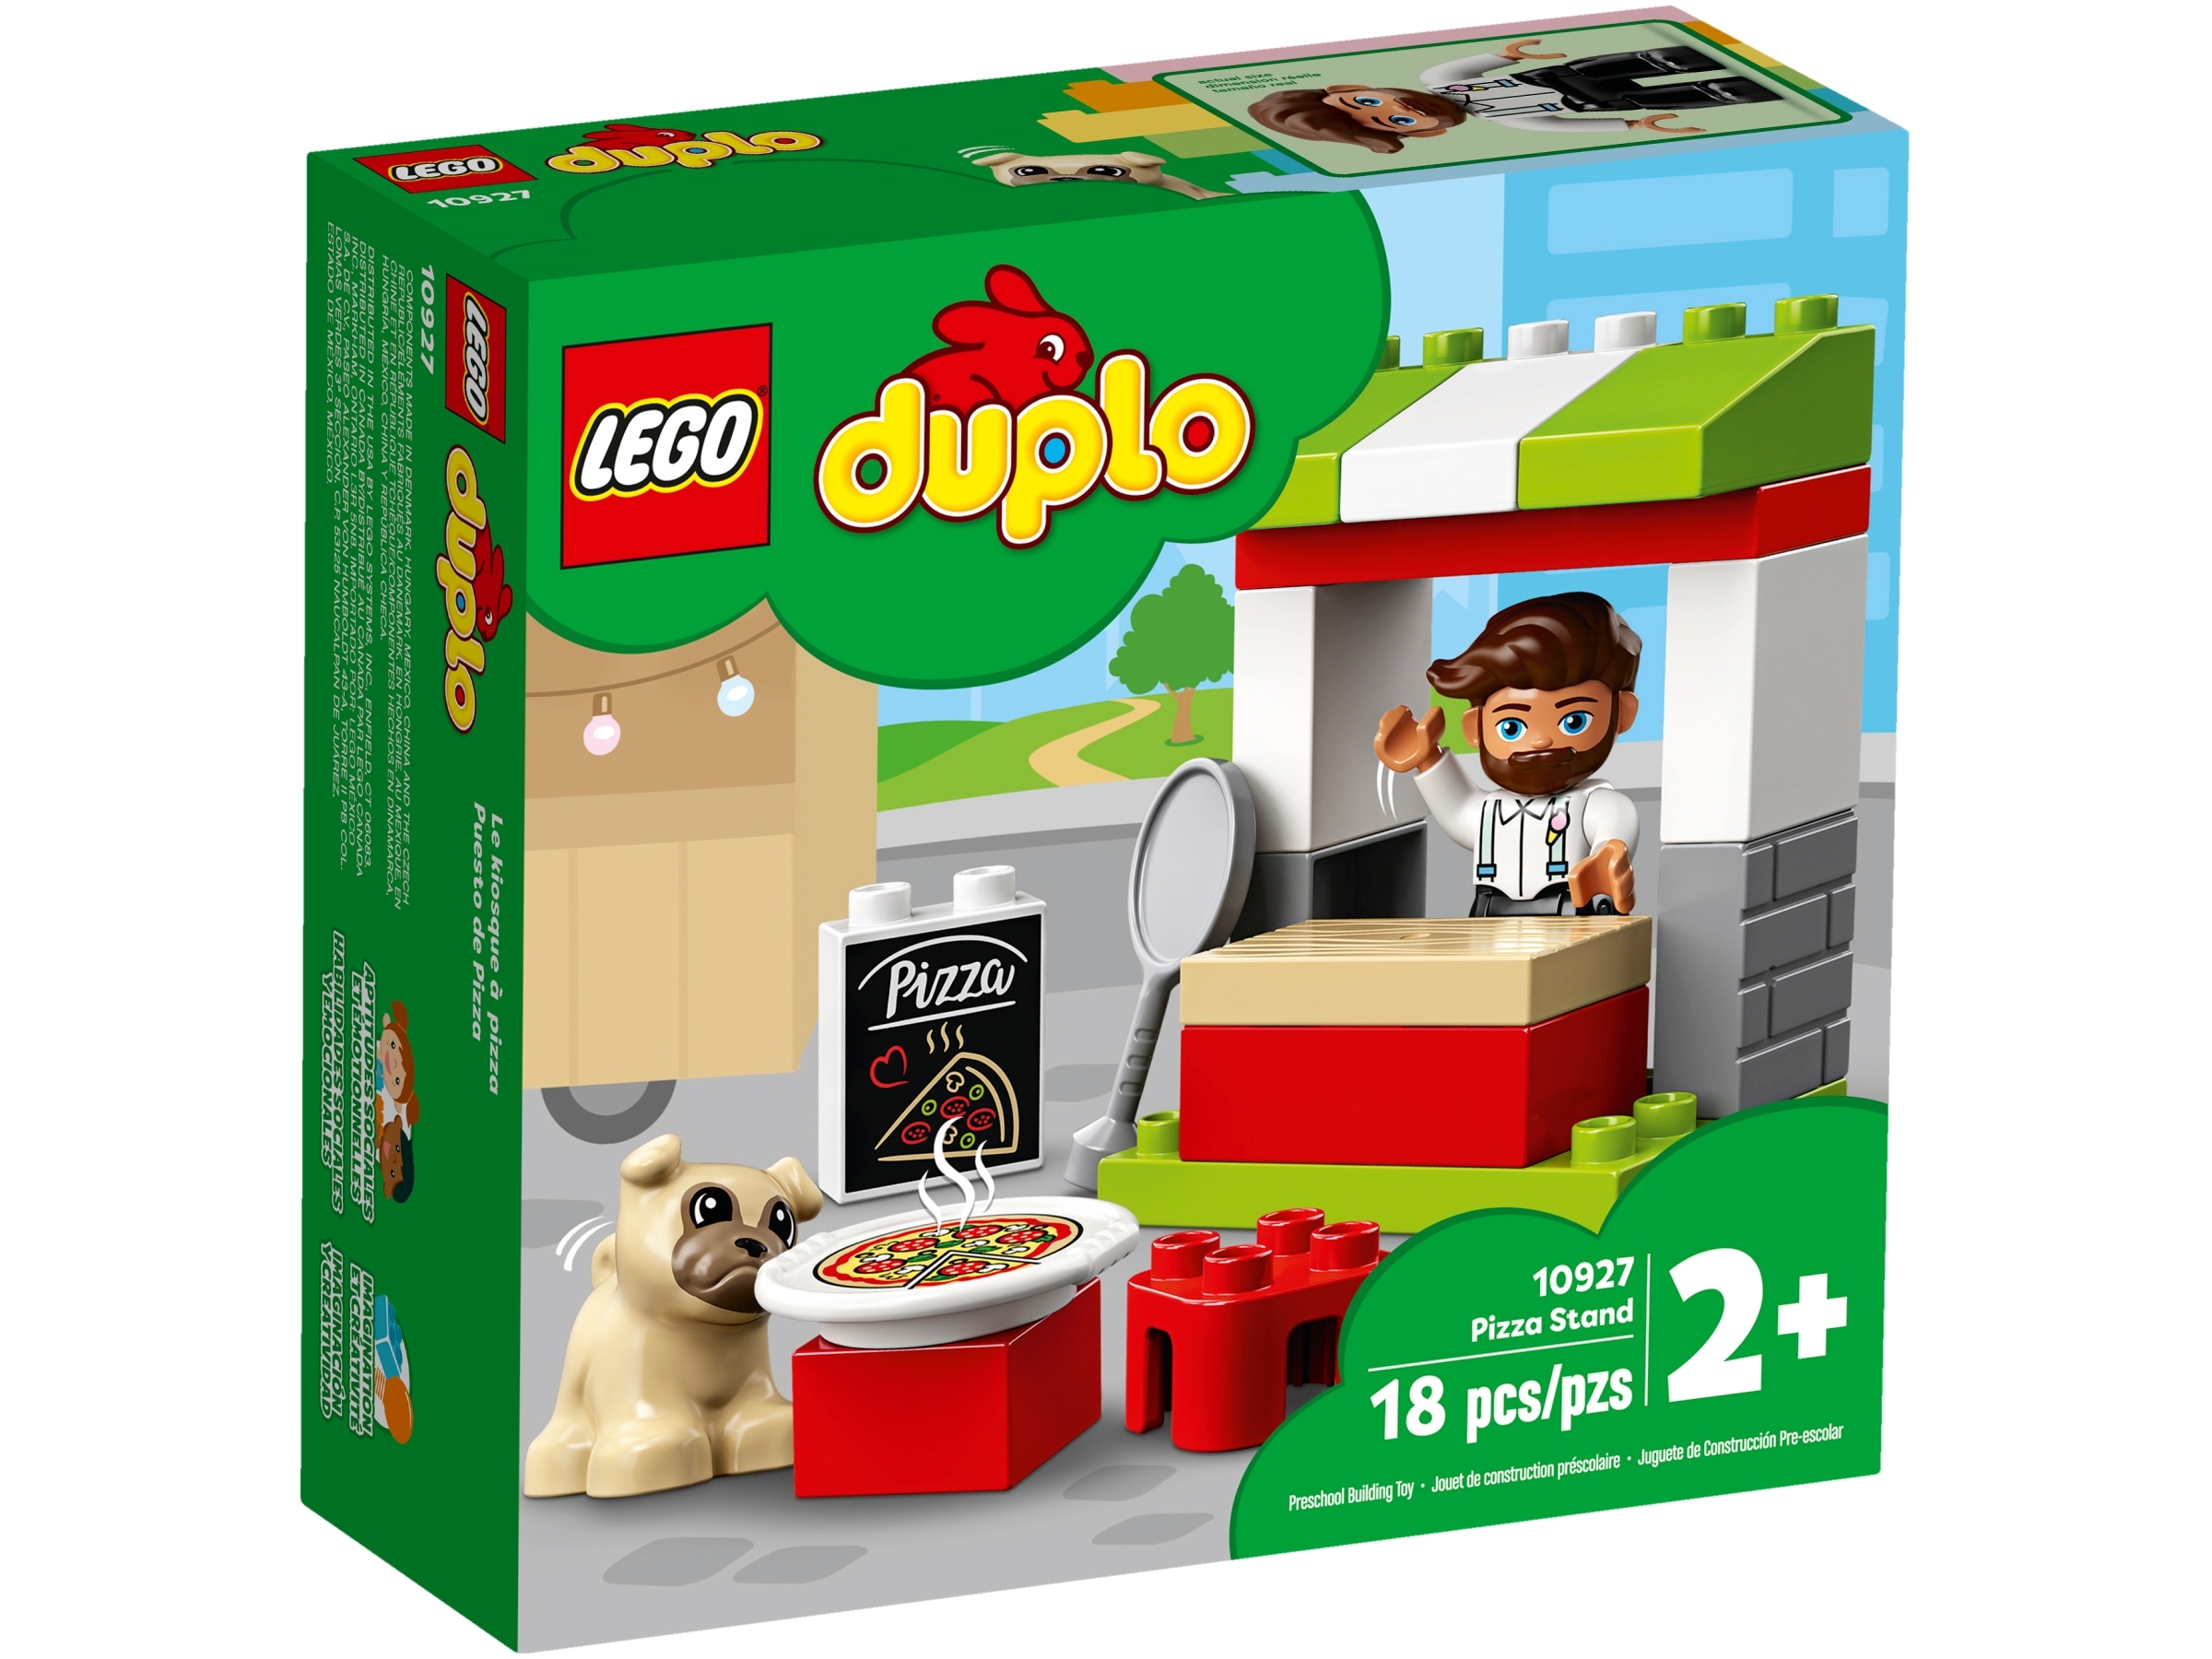 Lego 10927 DUPLO Town Pizza Stand Playset with Pizza and Dog Figure, Large Bricks Toy for Toddlers 2+ Year Old 